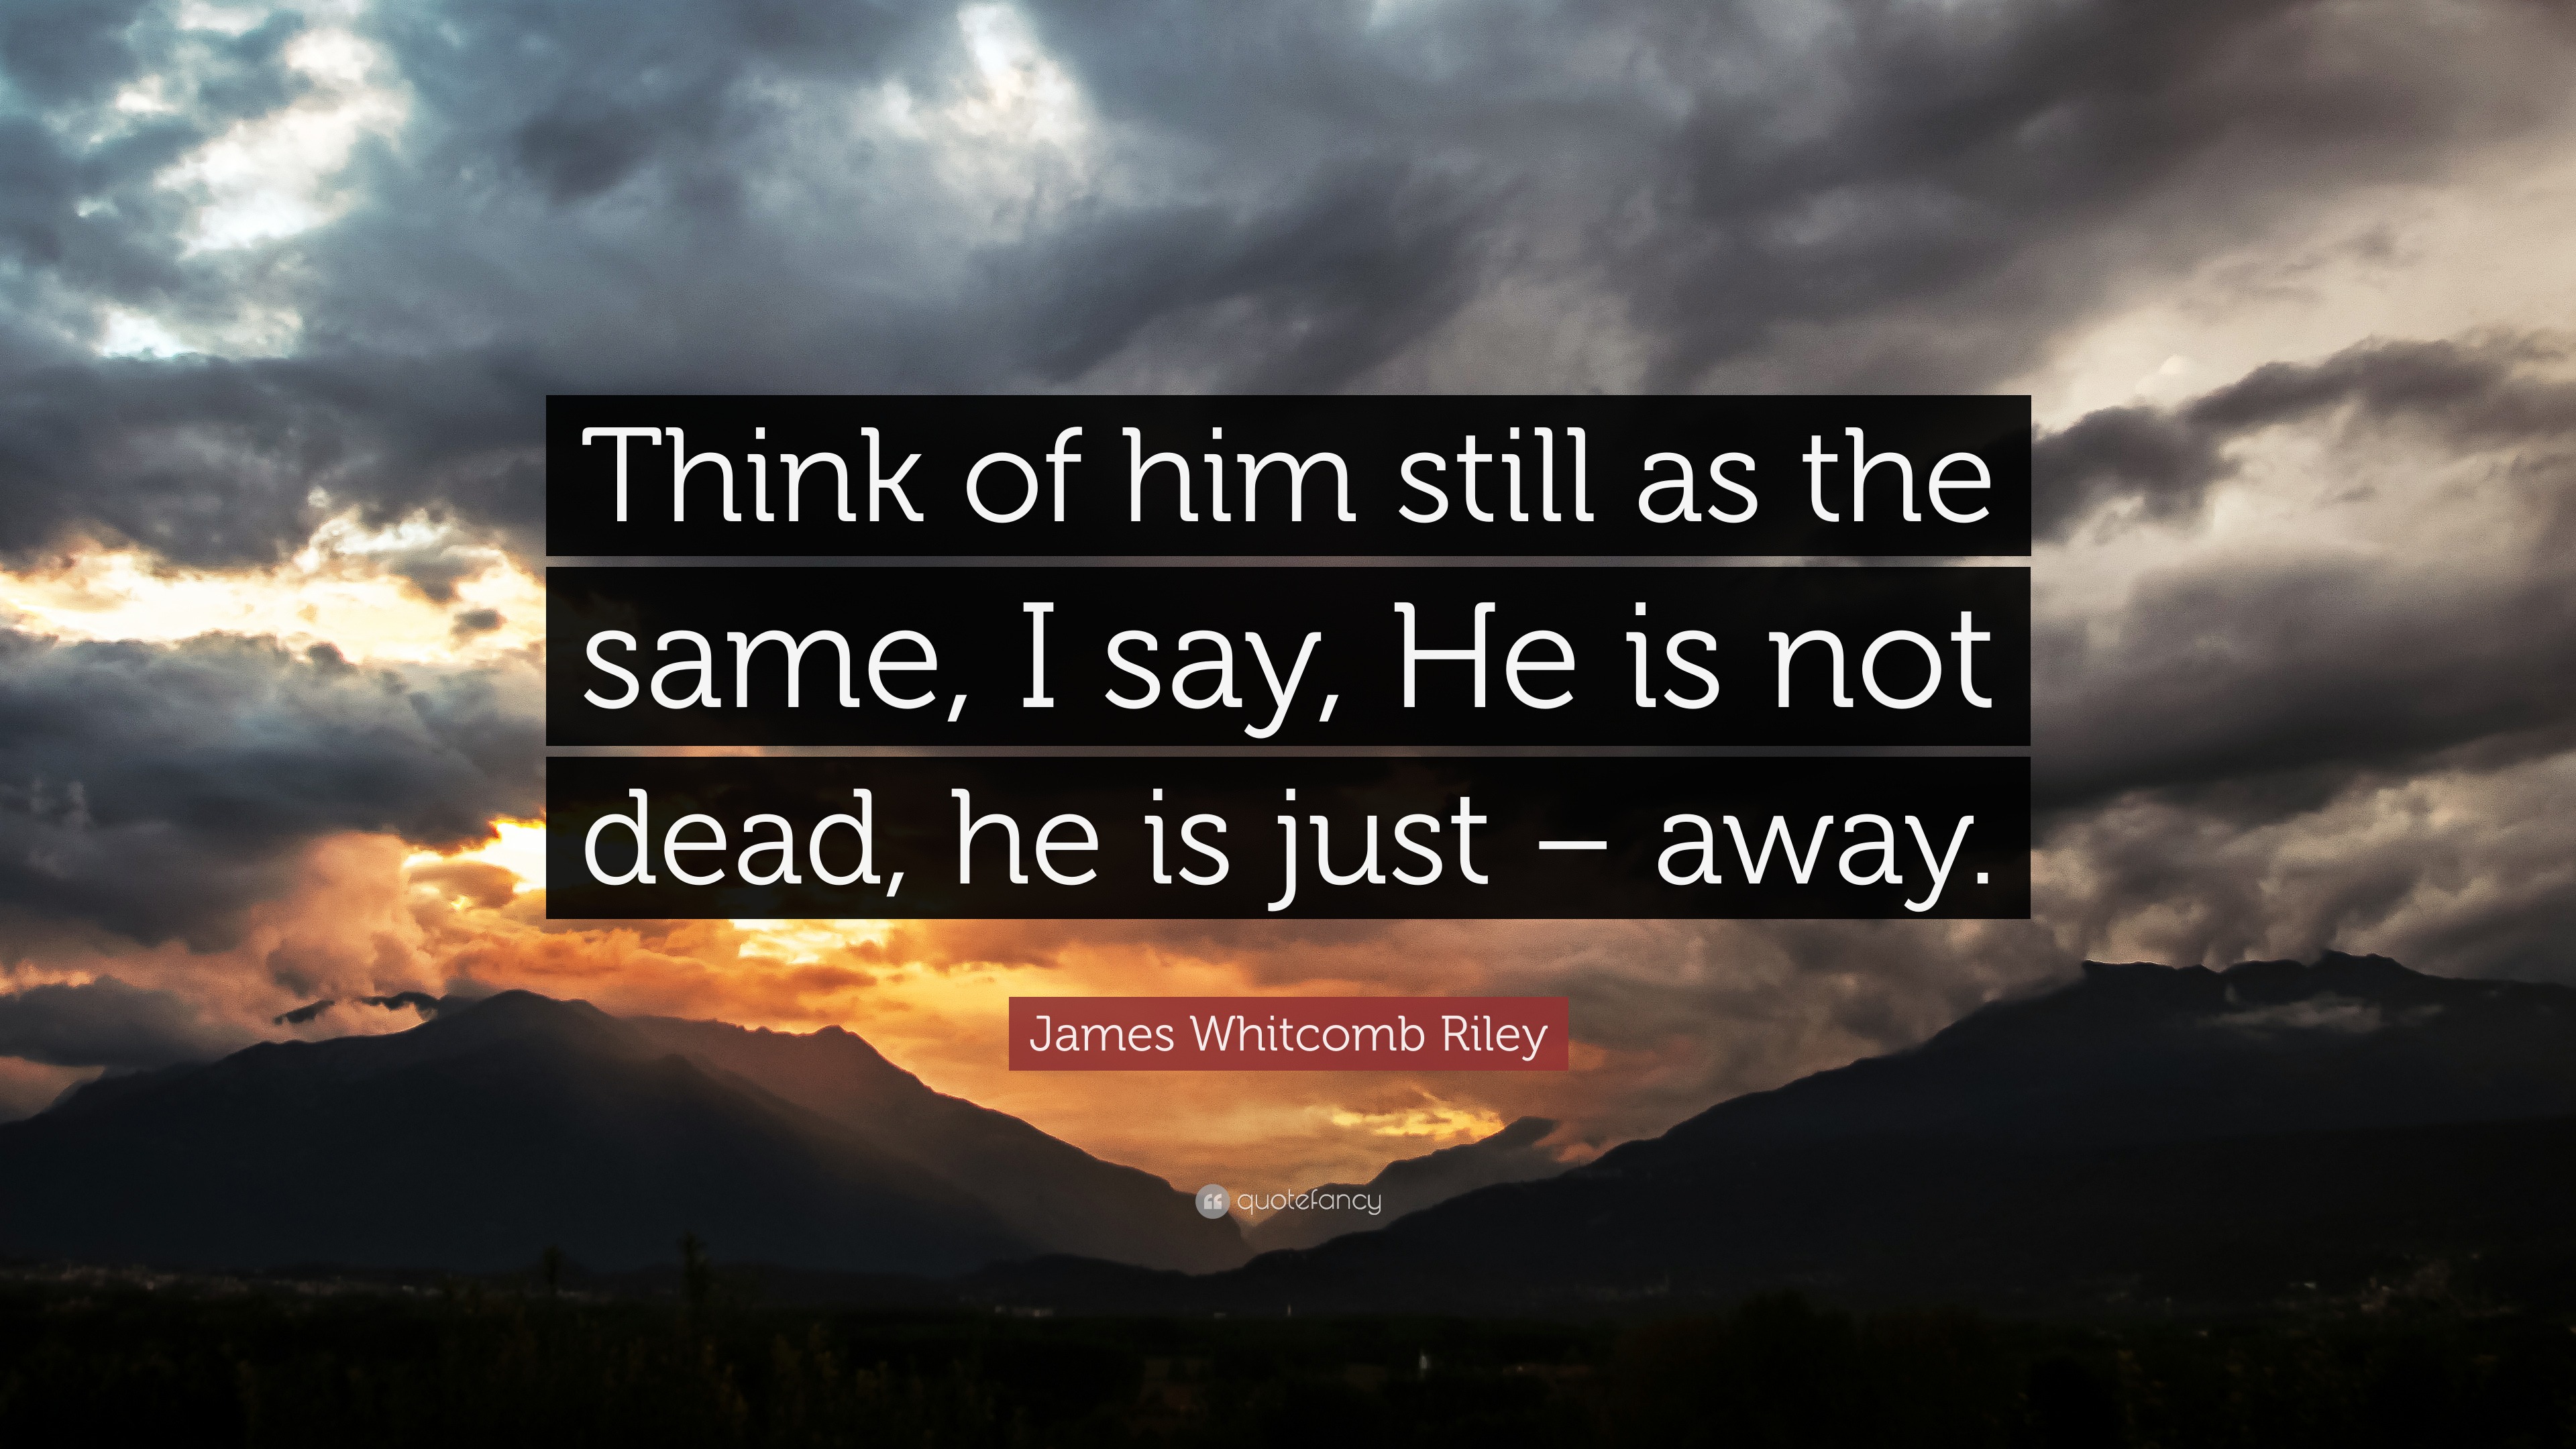 James Whitcomb Riley Quote: “Think of him still as the same, I say, He ...